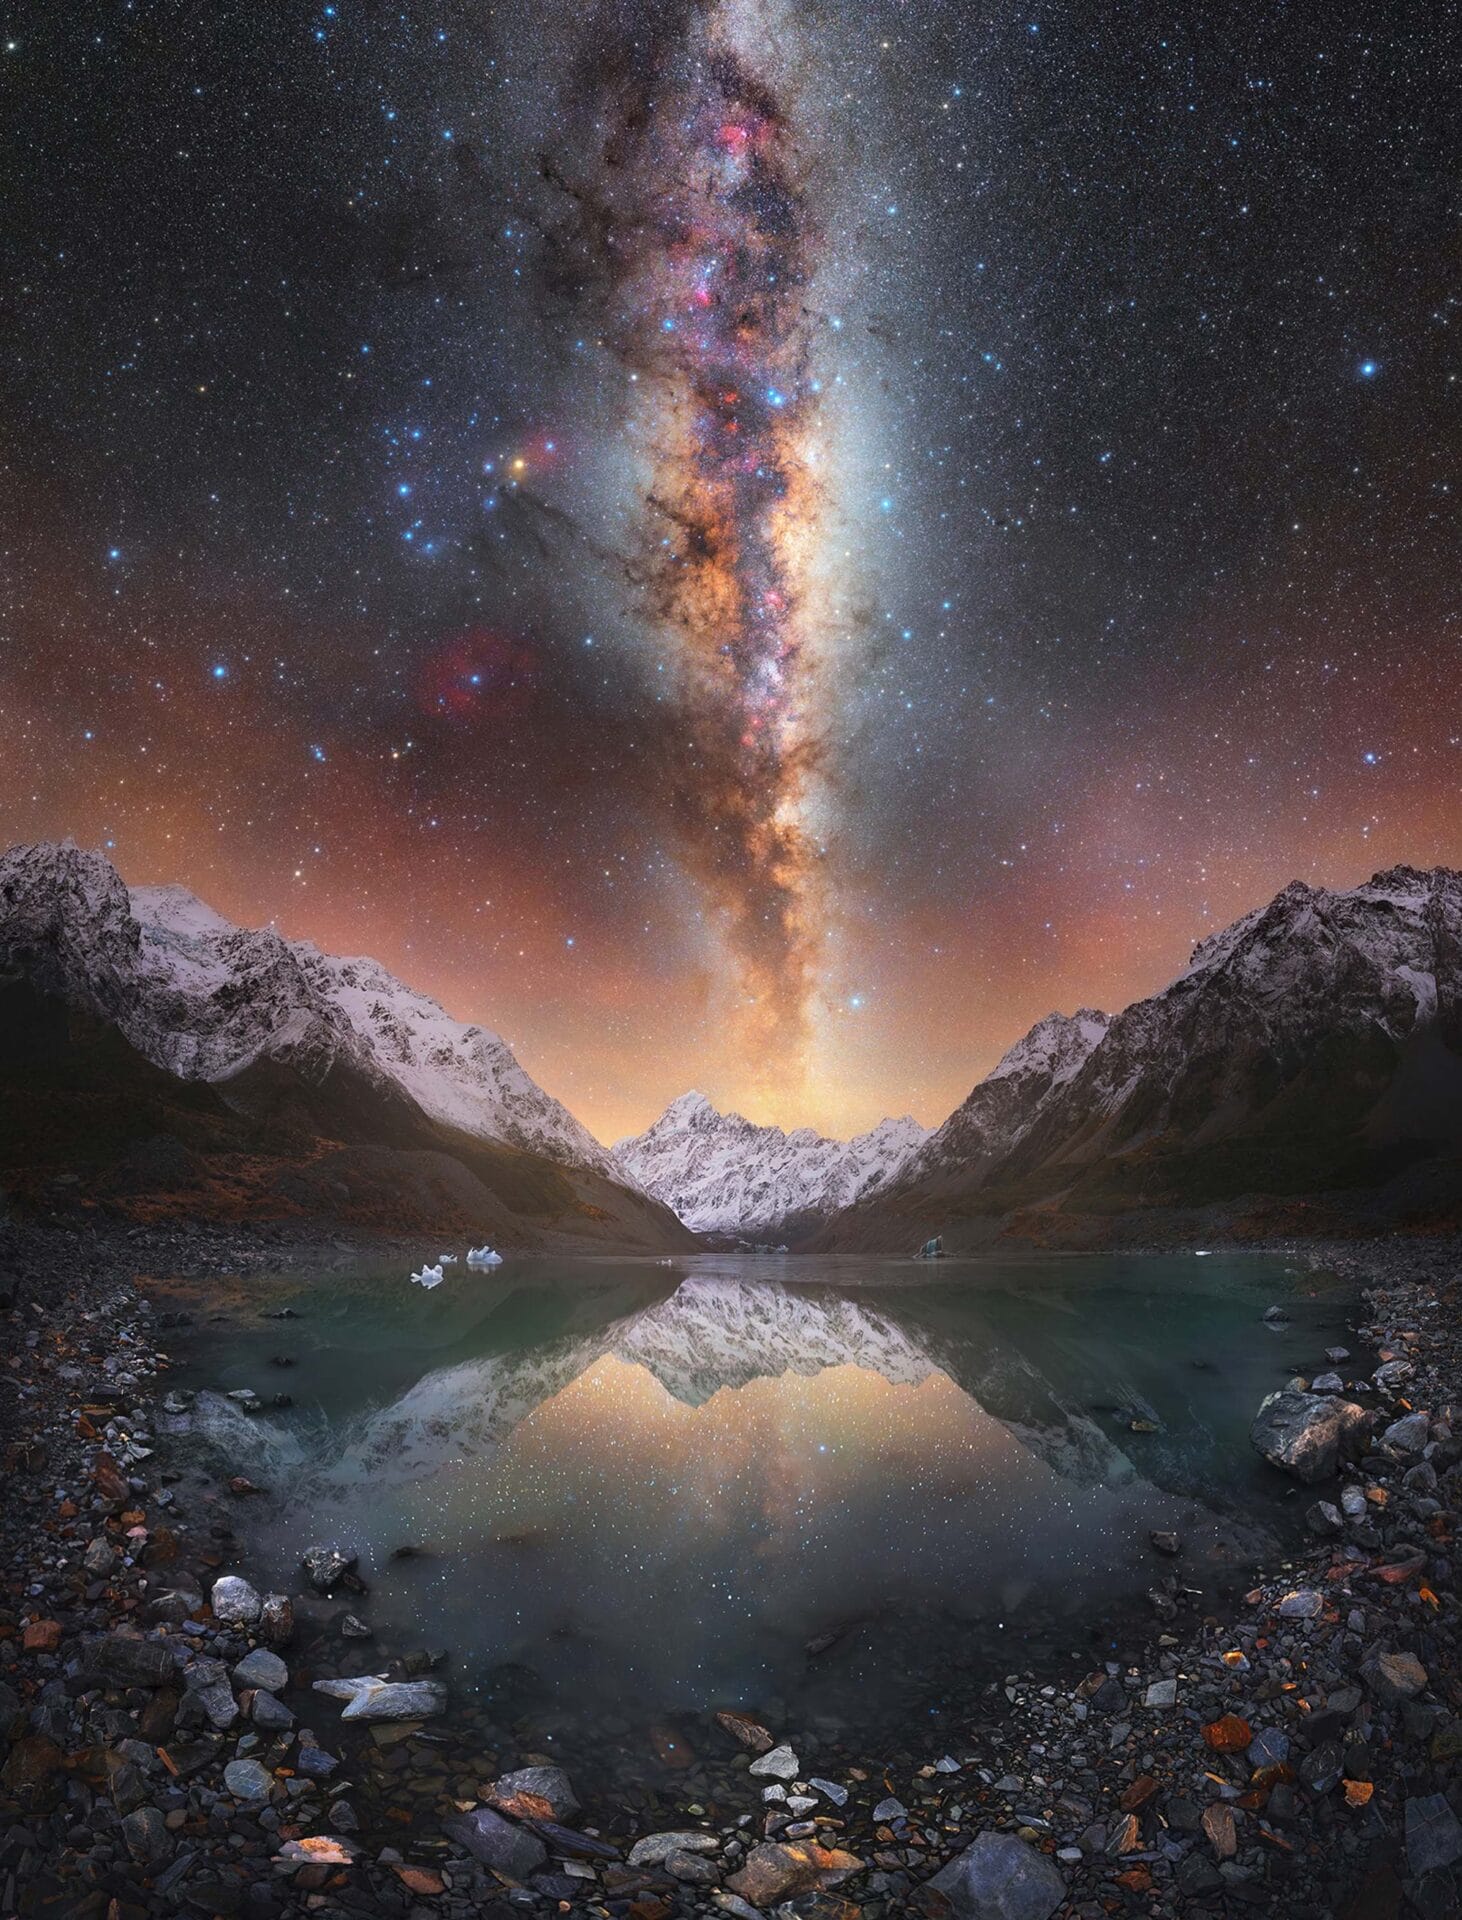 the brilliant star studded milky way above a lake with mountains in the background